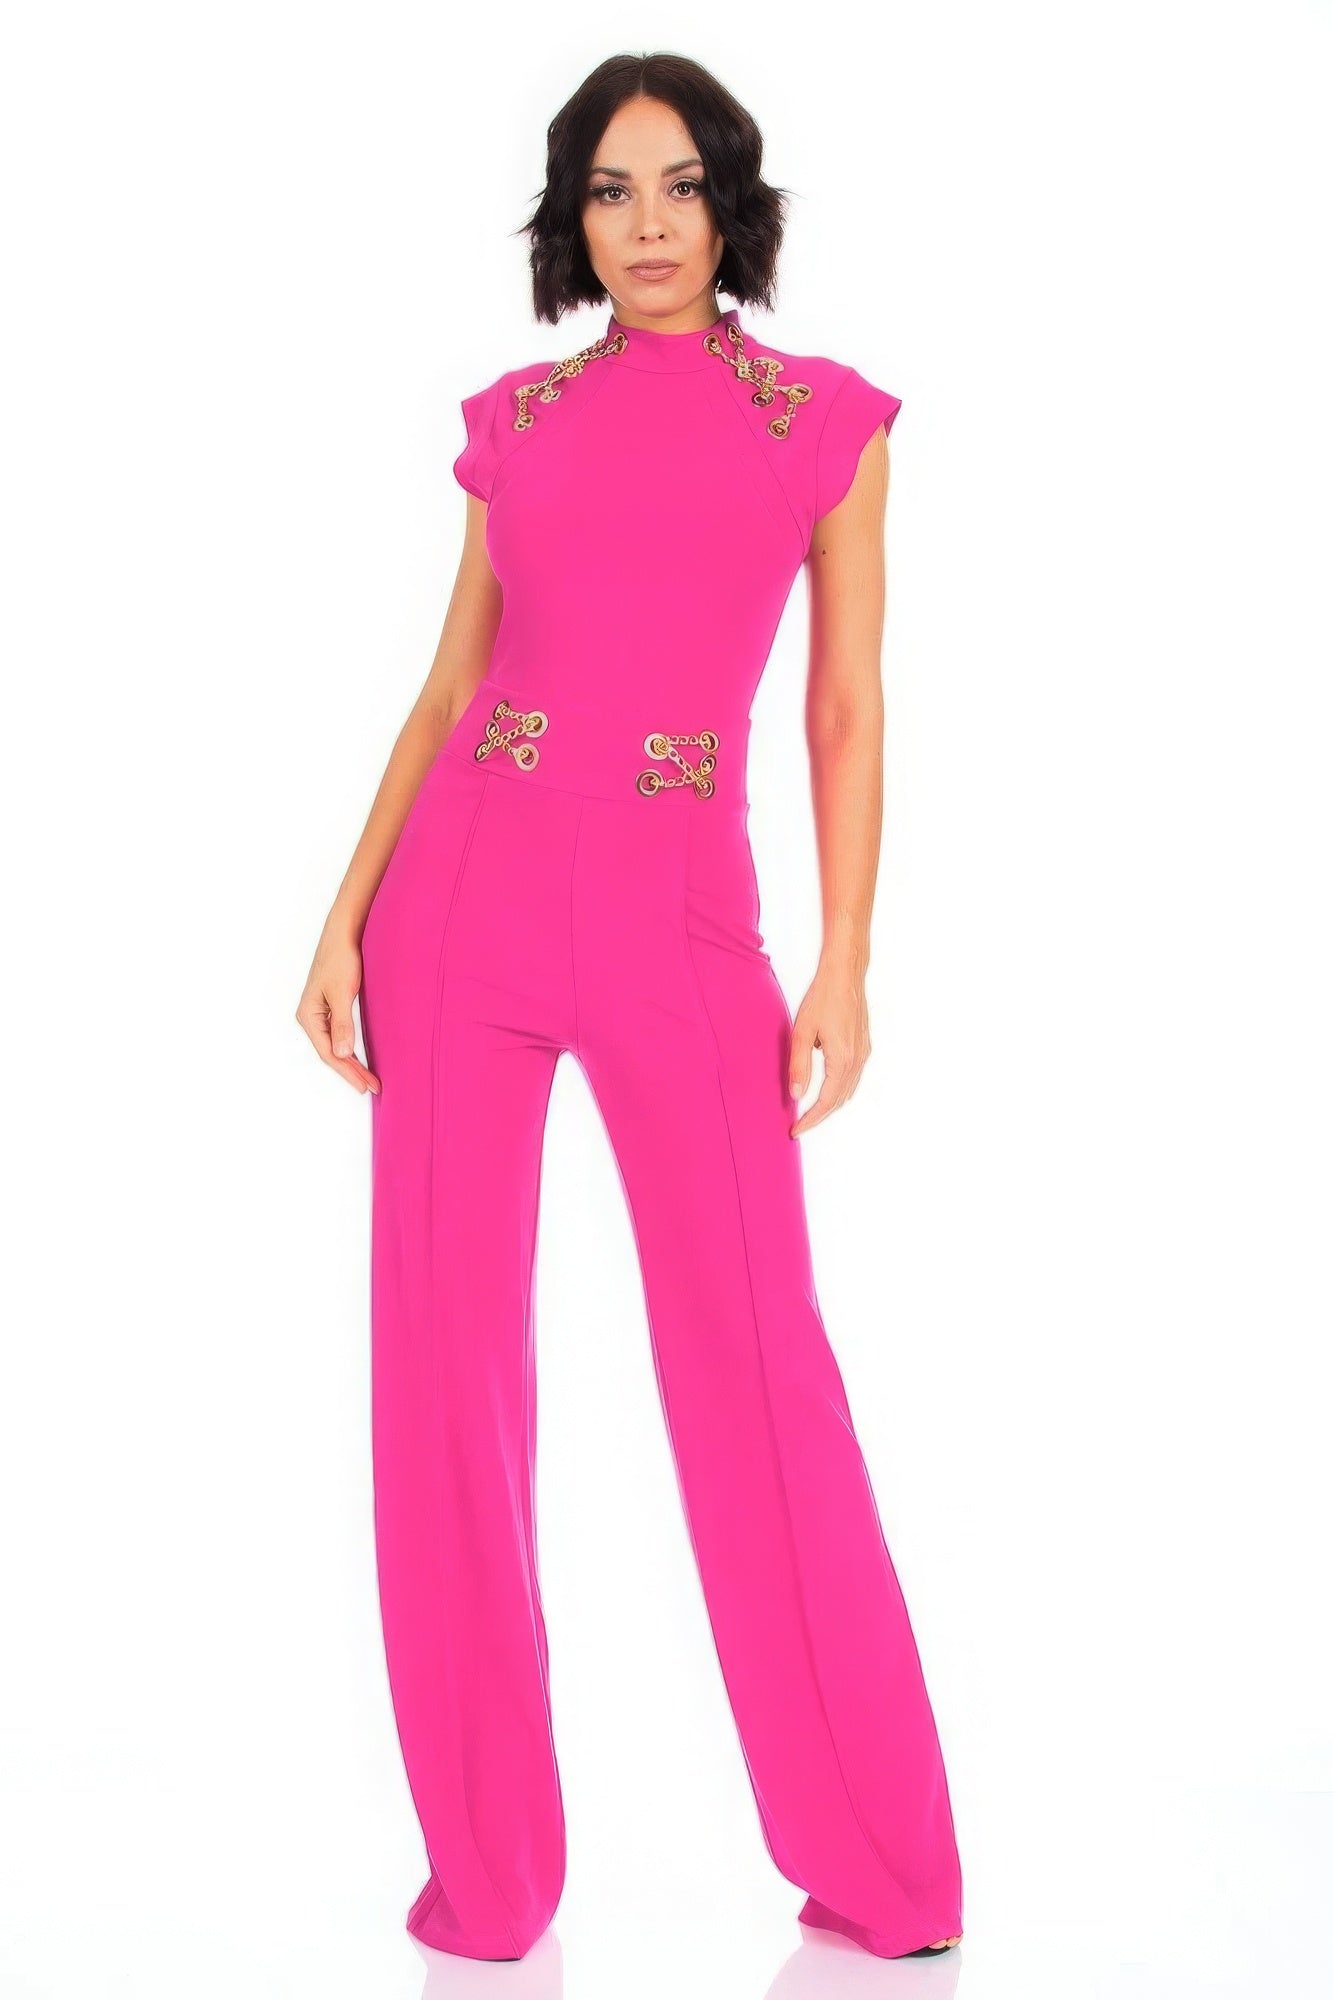 THE COURTNEY Eyelet With Chain Deatiled Fashion Jumpsuit